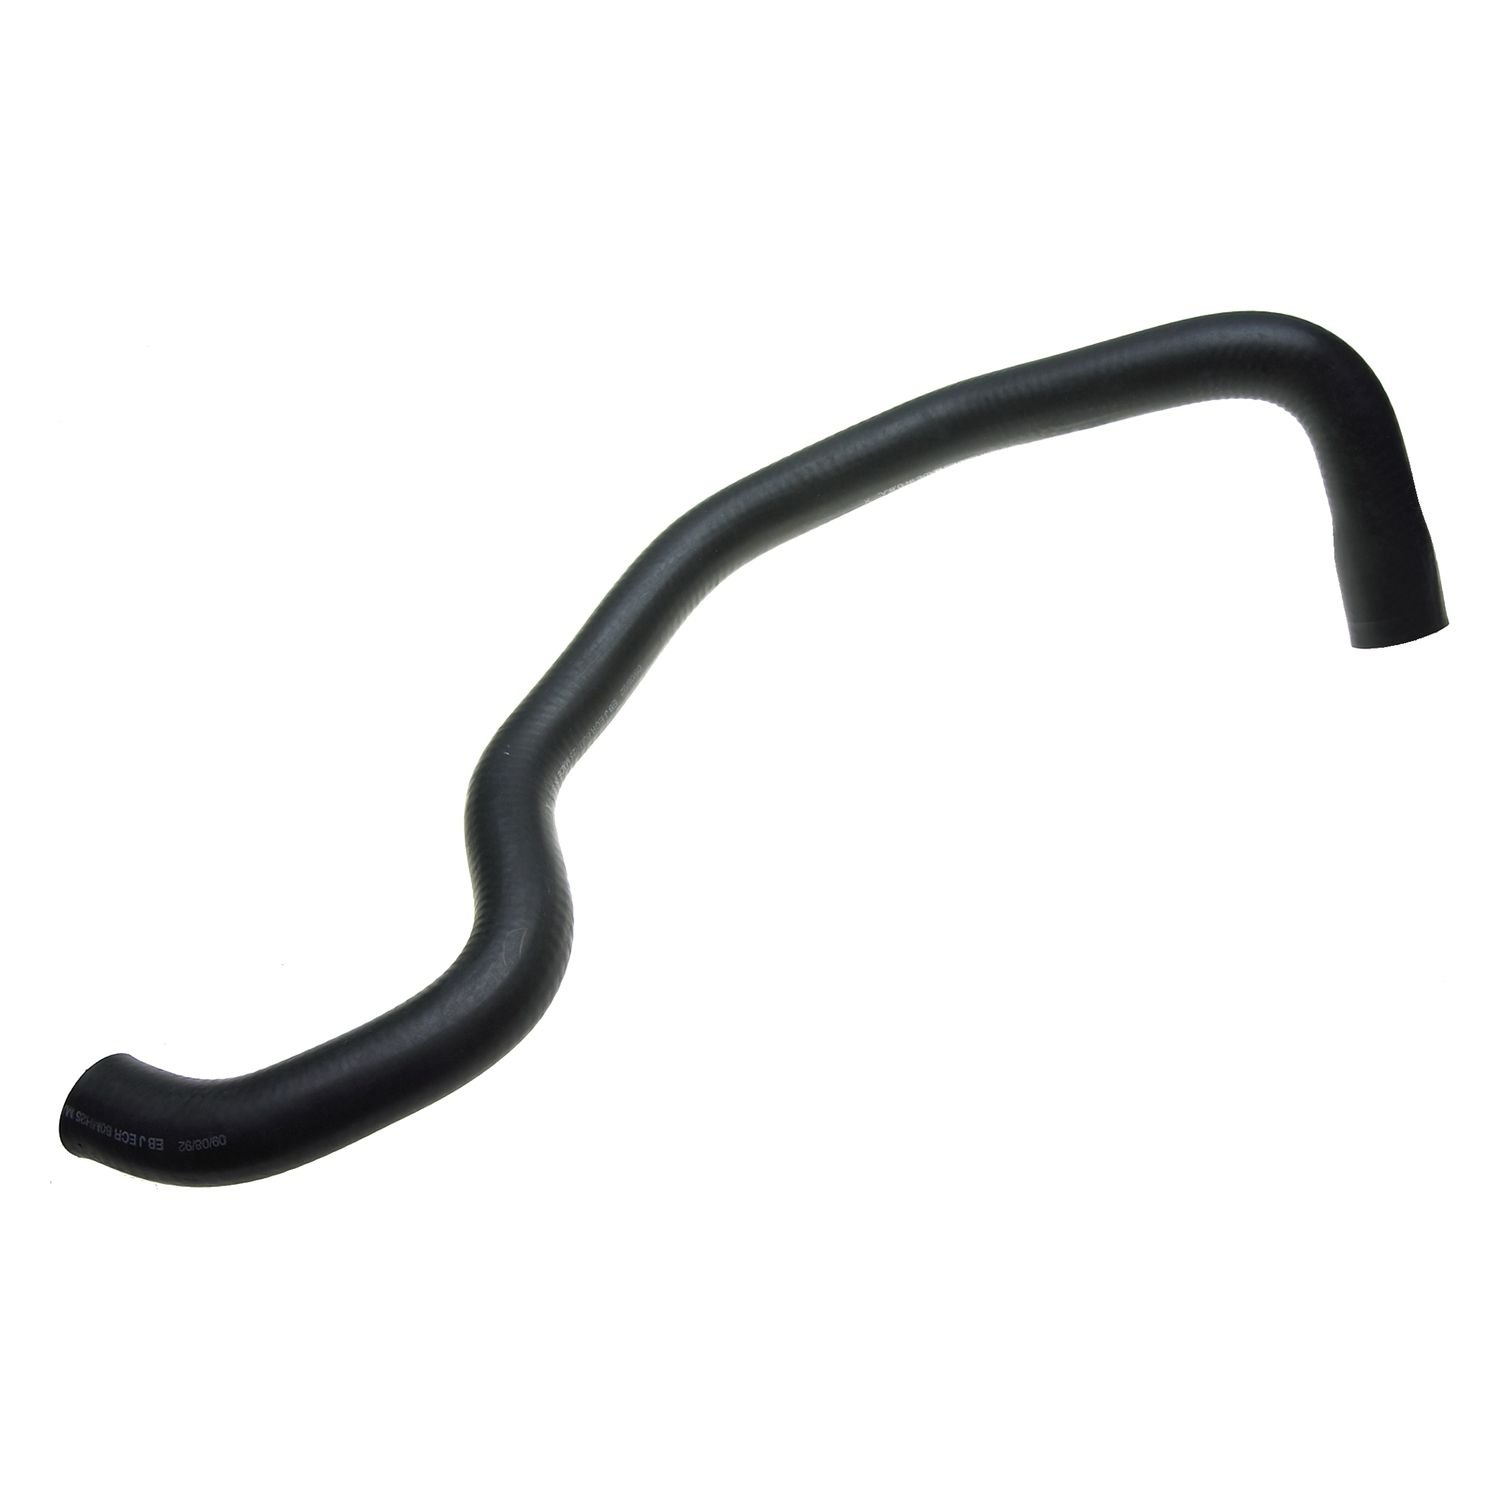 ACDelco 26211X Professional Upper Molded Coolant Hose